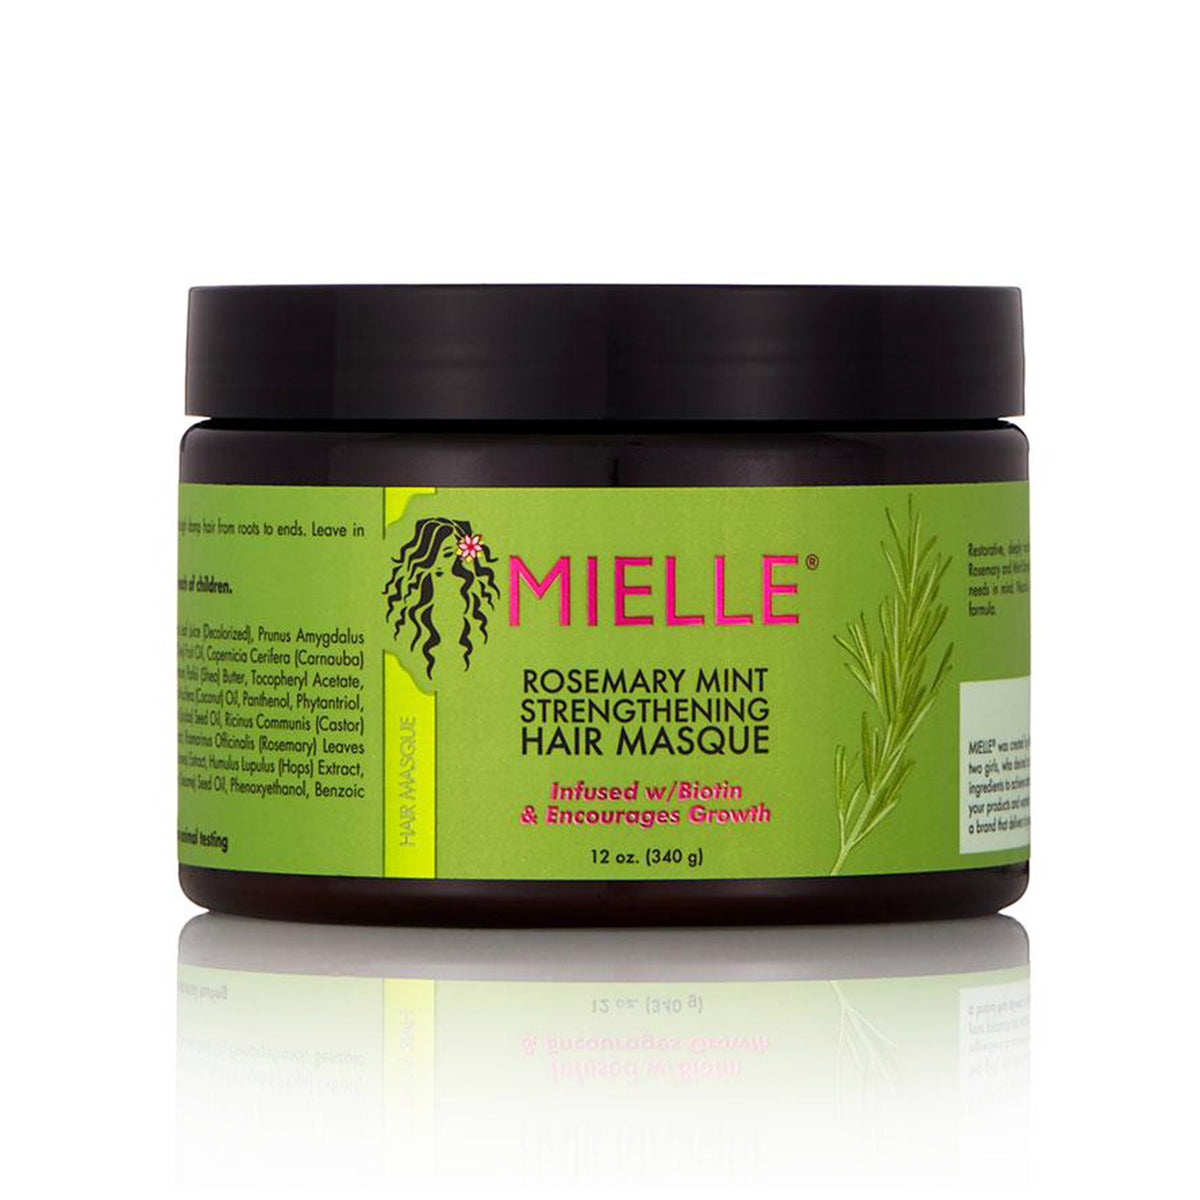 Mielle Rosemary Mint Strengthening Hair Masque 340 g - AQ Online